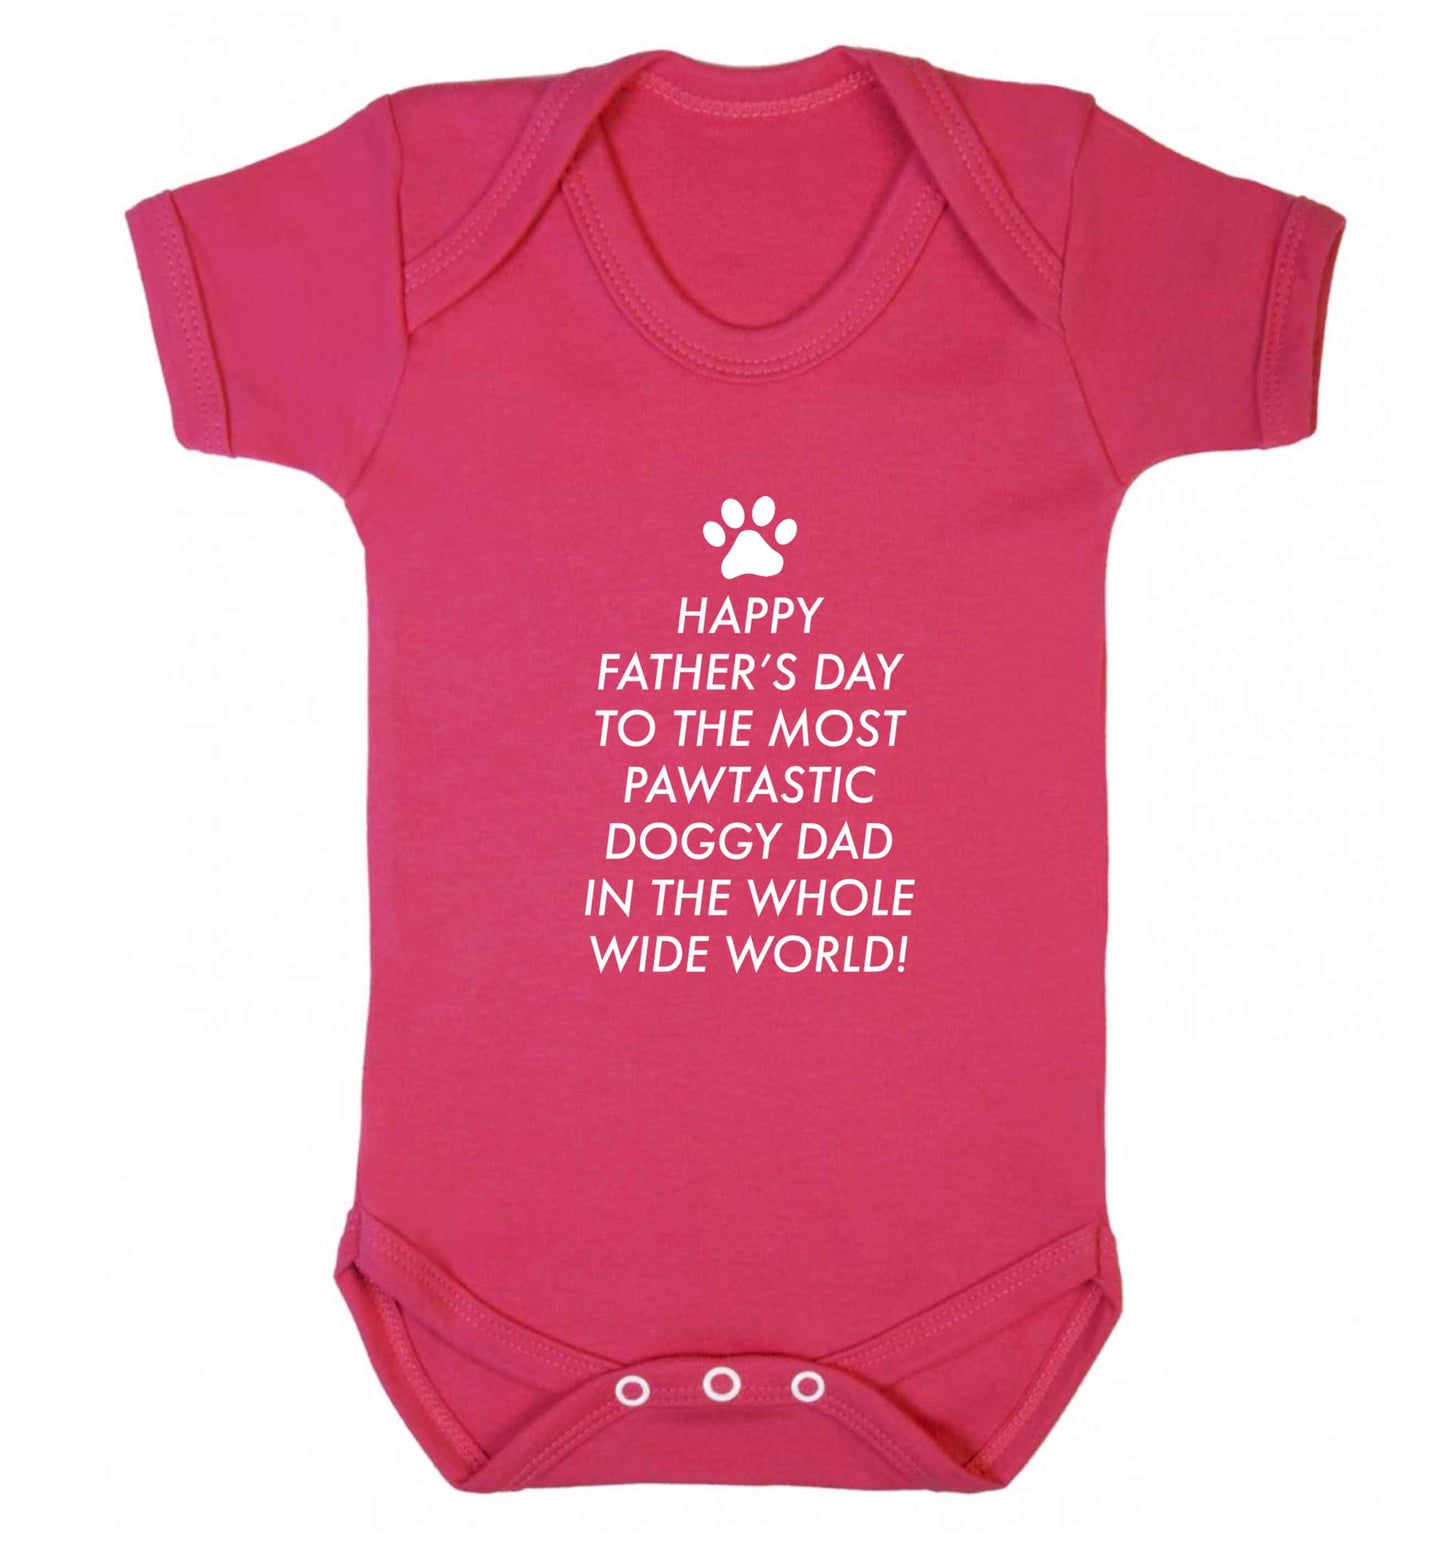 Happy Father's day to the most pawtastic doggy dad in the whole wide world!baby vest dark pink 18-24 months